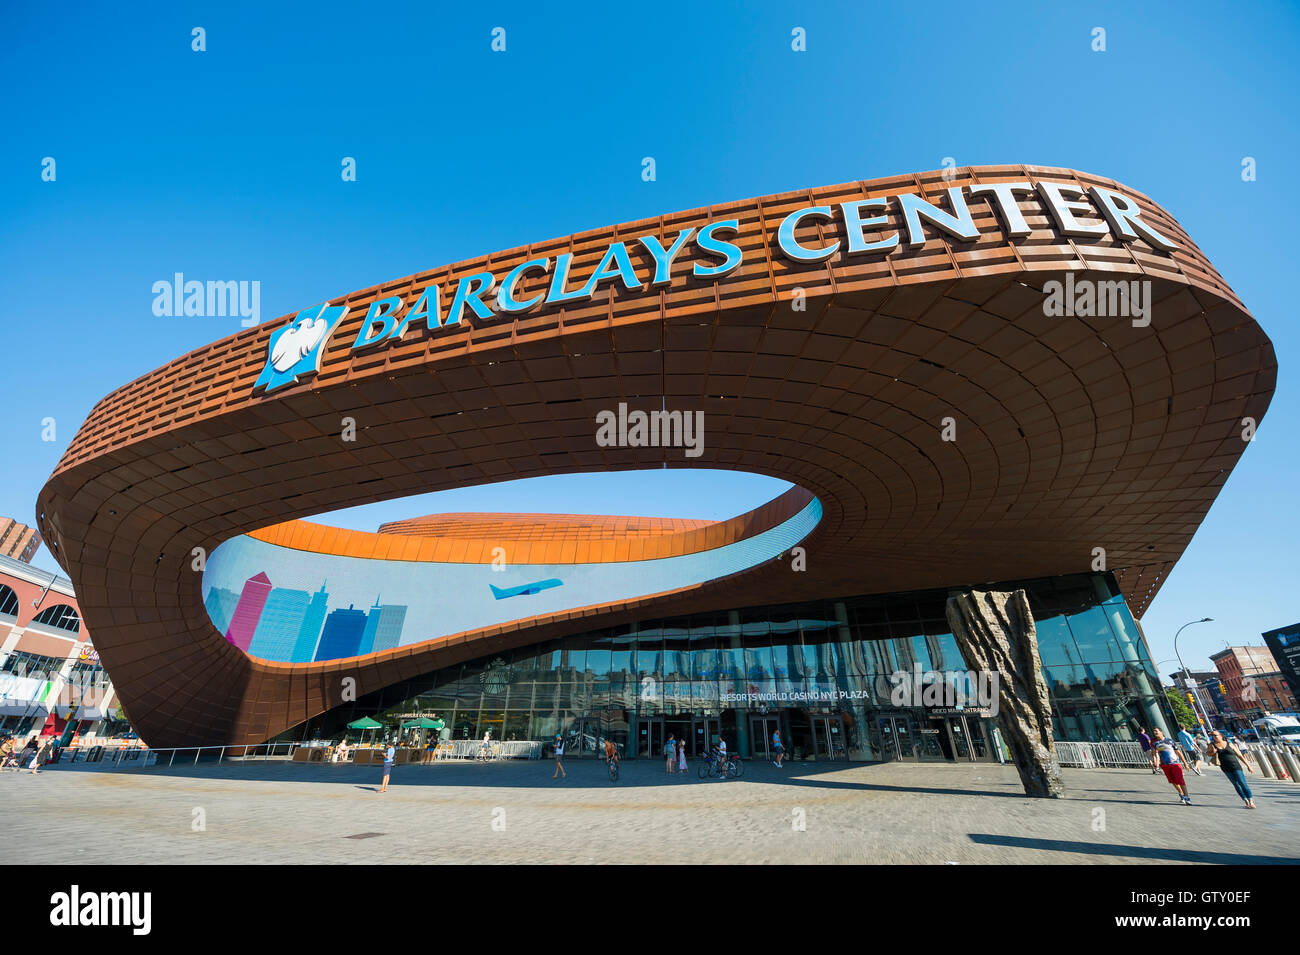 NEW YORK CITY - AUGUST 30, 2016: Pedestrians pass under the distinctive architecture of the Barclays Center sports complex. Stock Photo